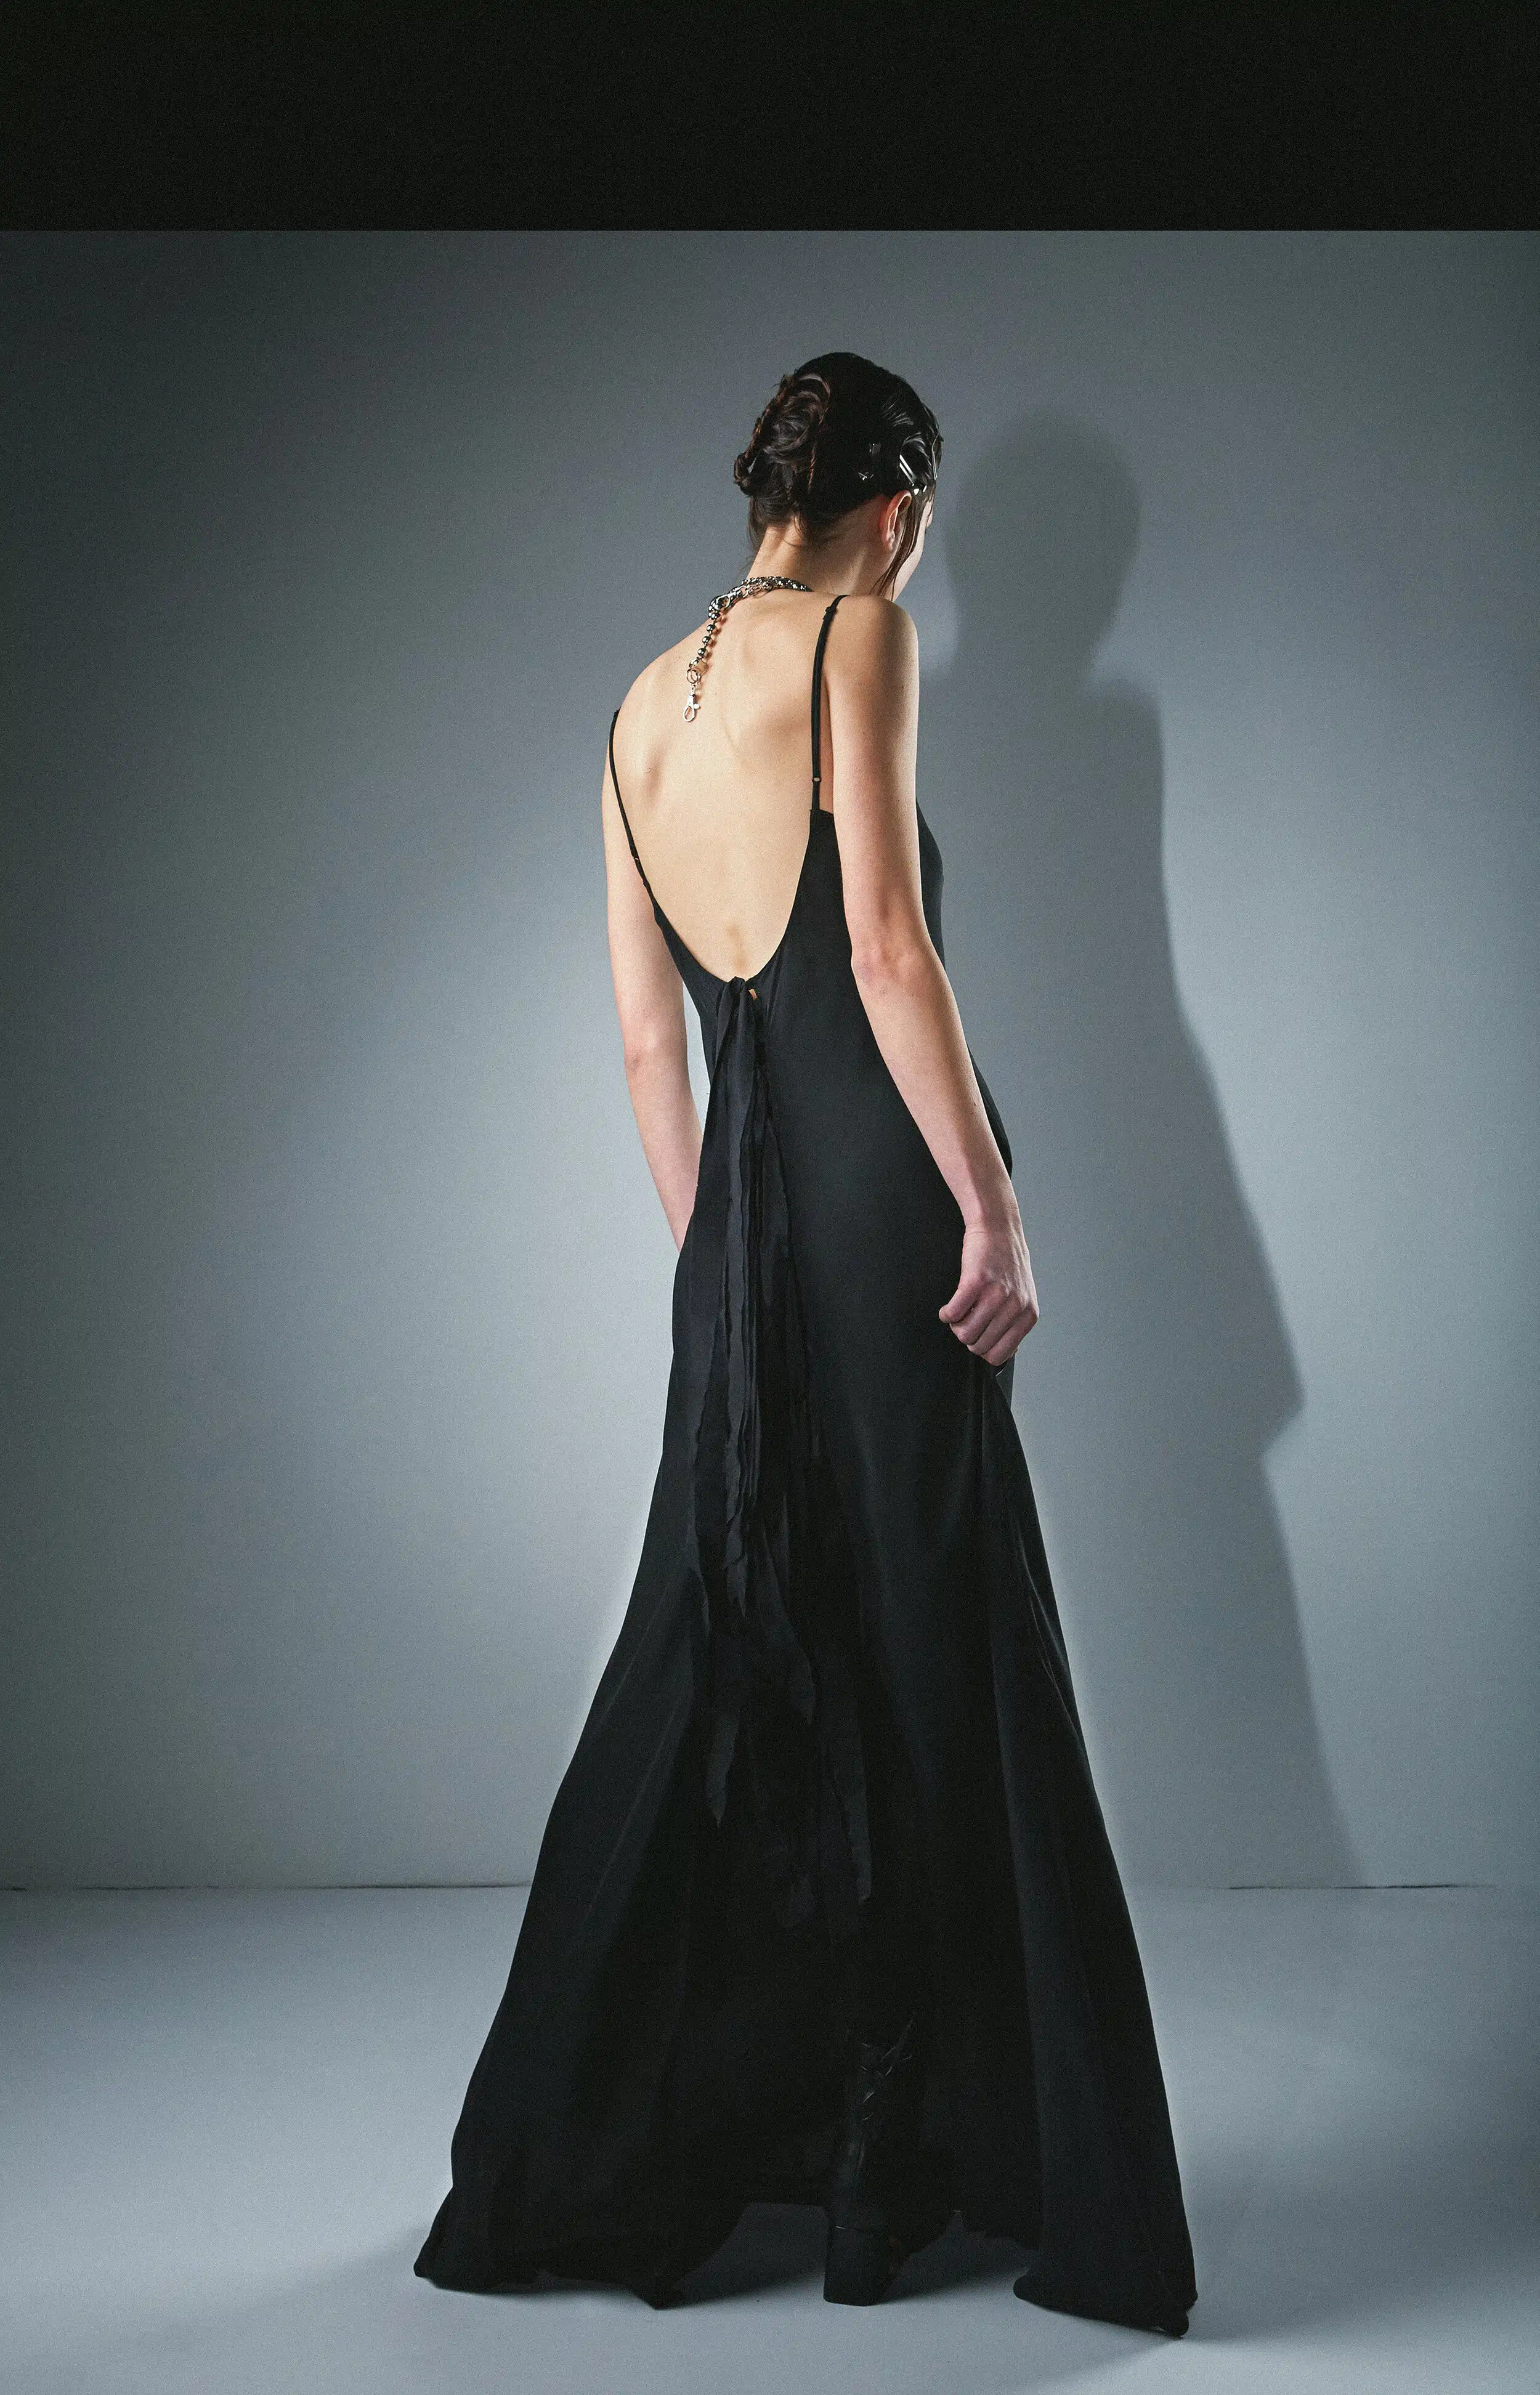 Image from FW20 Collection